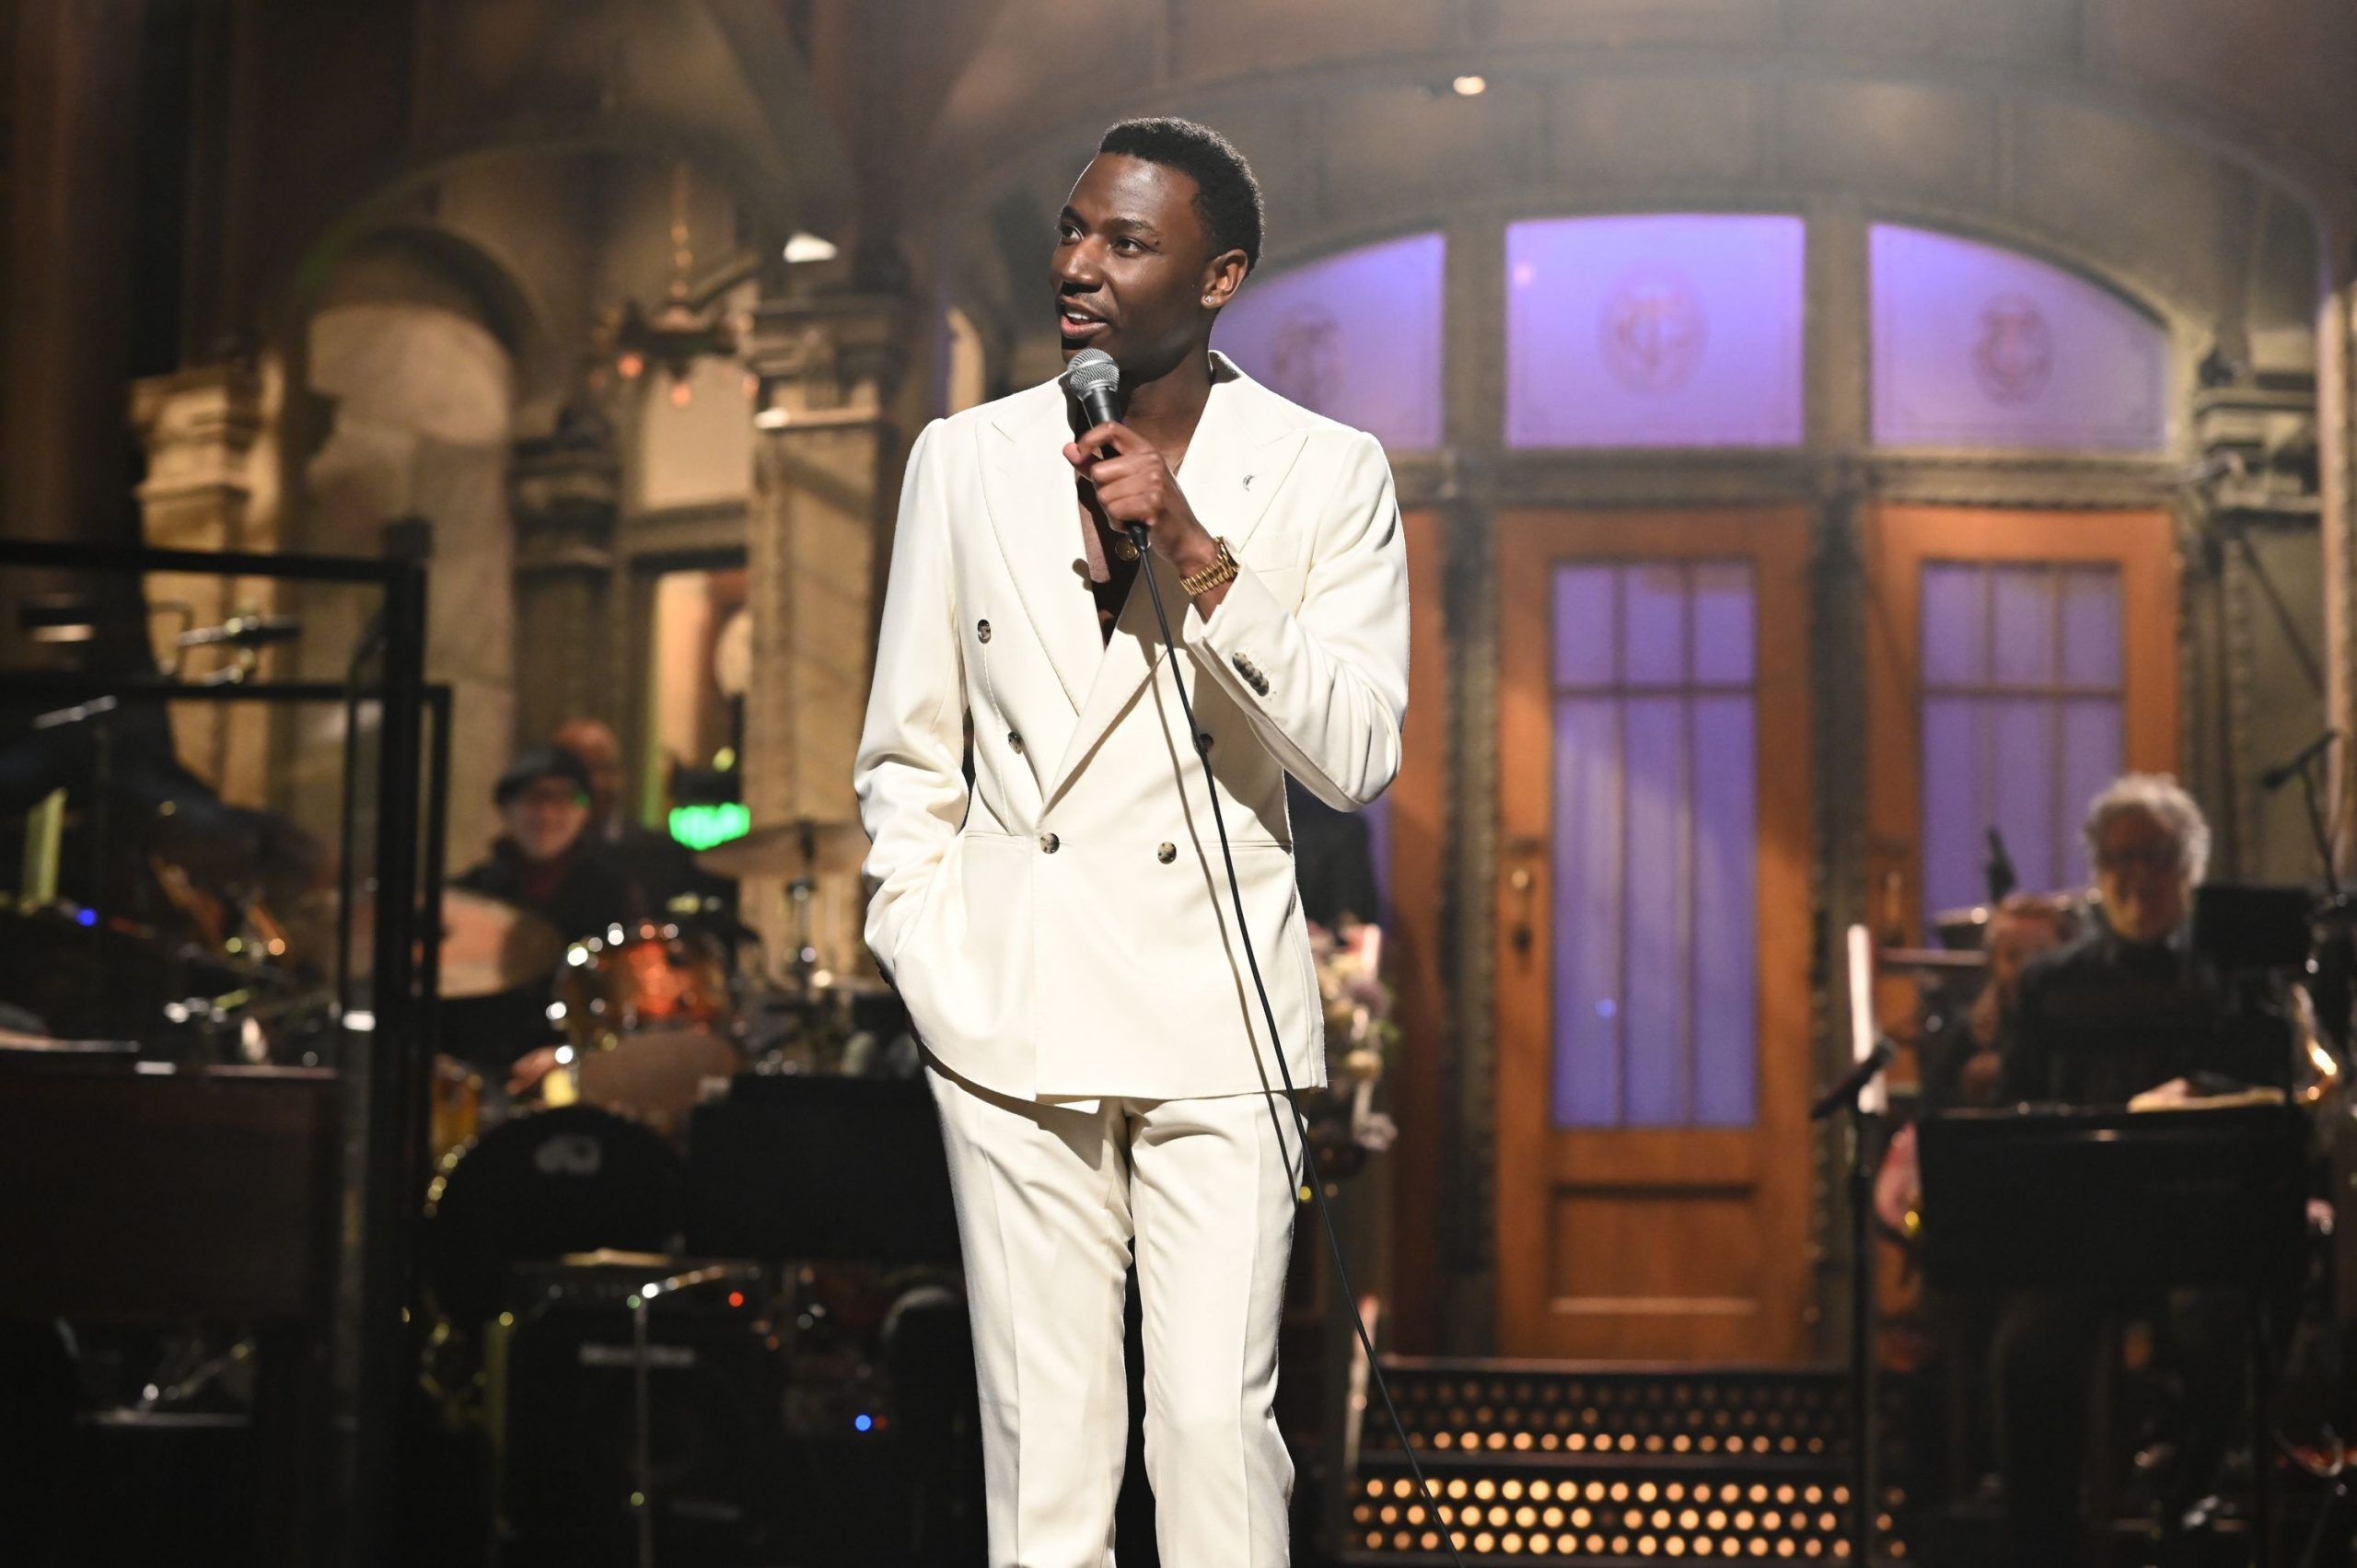 Jerrod Carmichael to become first-ever solo Black Golden Globes host in 2023